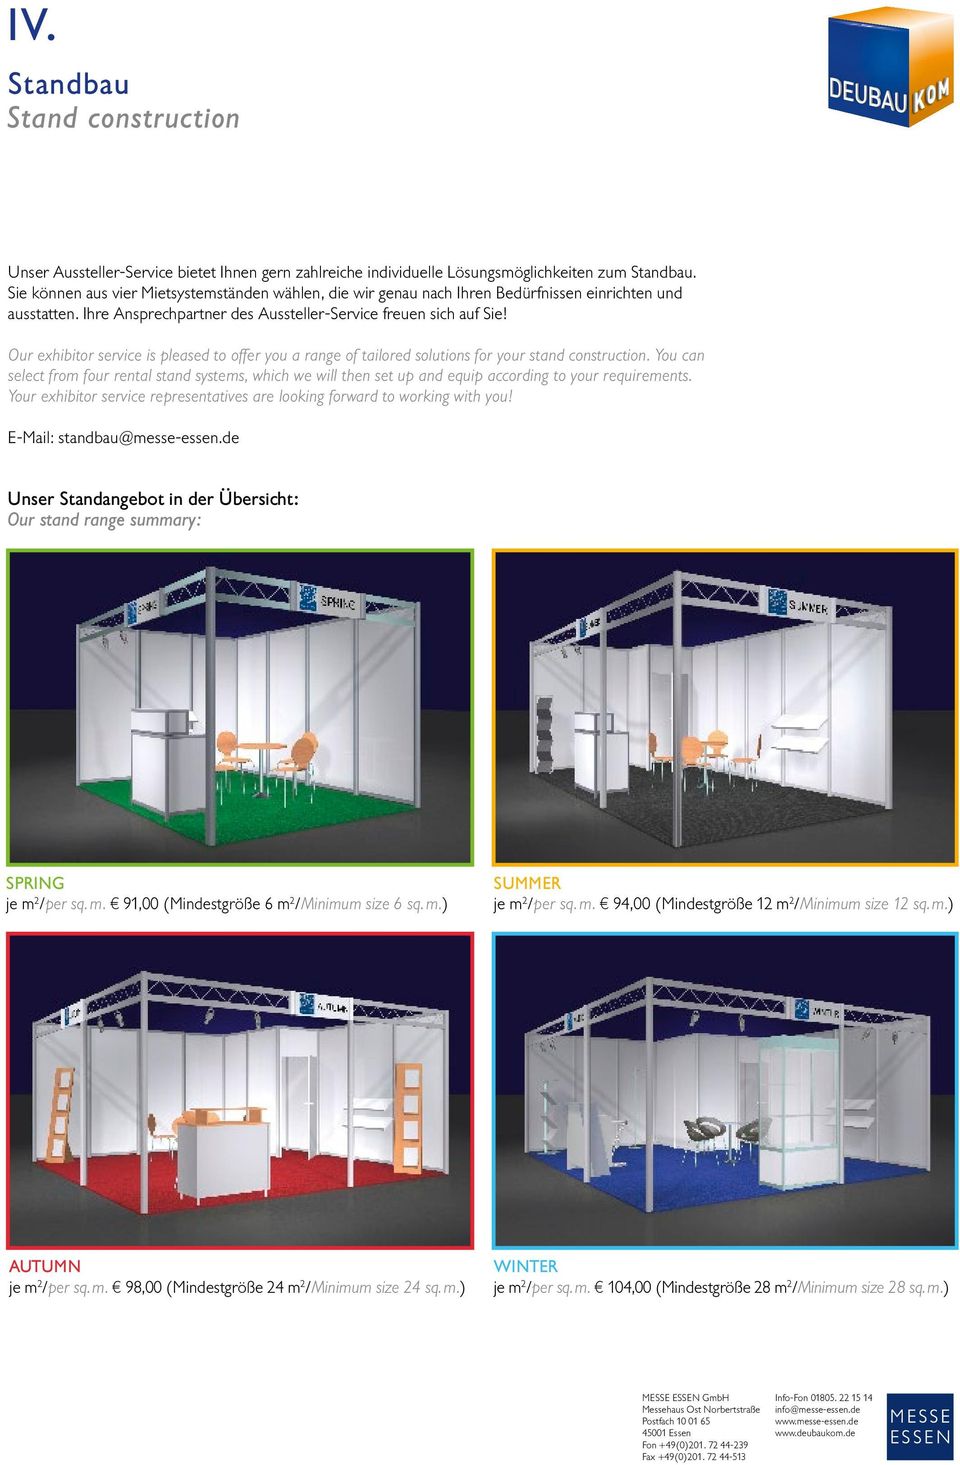 Our exhibitor servie is pleased to offer you a range of tailored solutions for your stand onstrution.